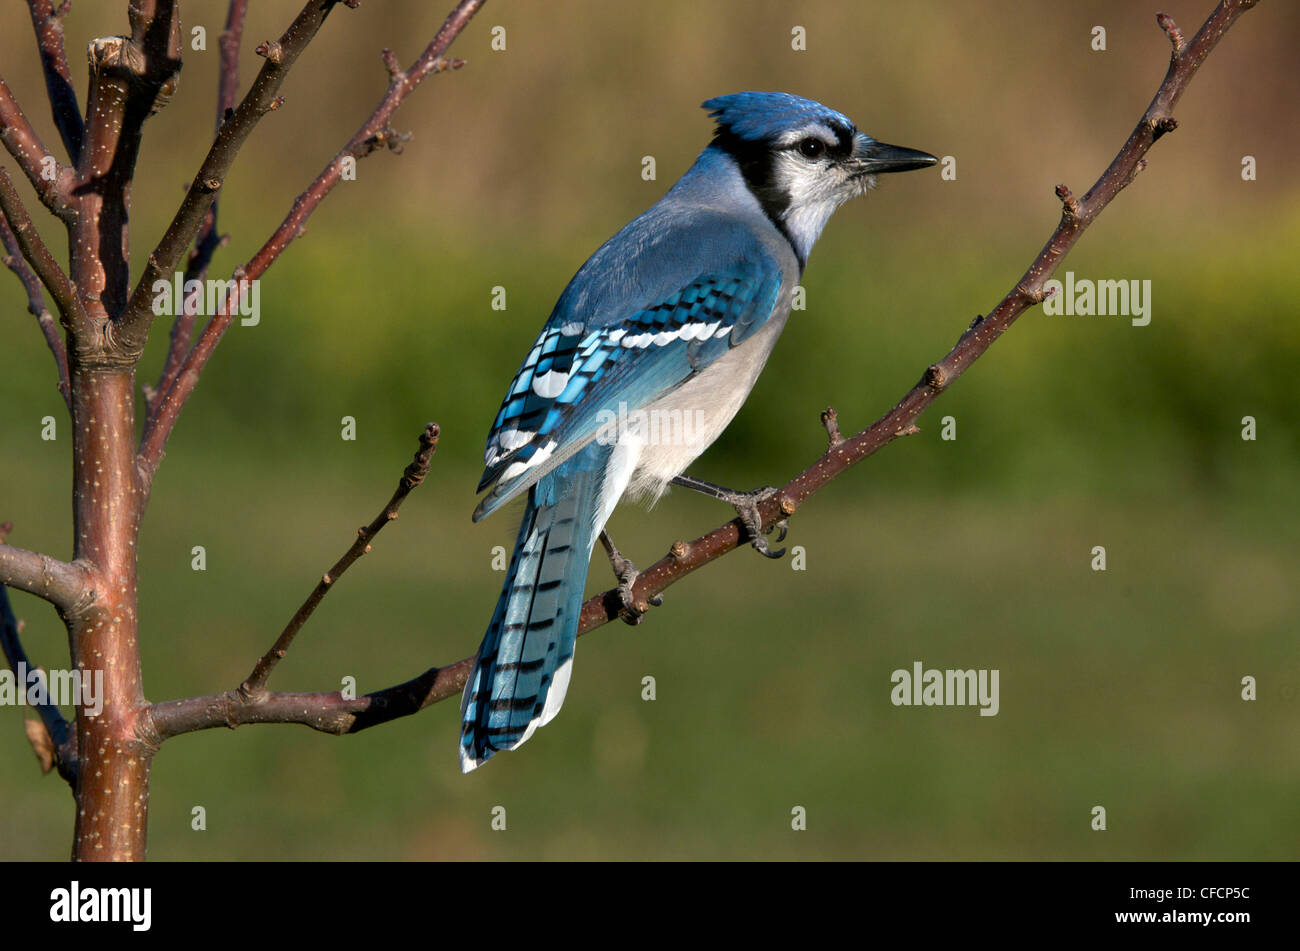 A Blue Jay (Cyanocitta cristata) perched on a tree branch. Ontario, Canada. Stock Photo